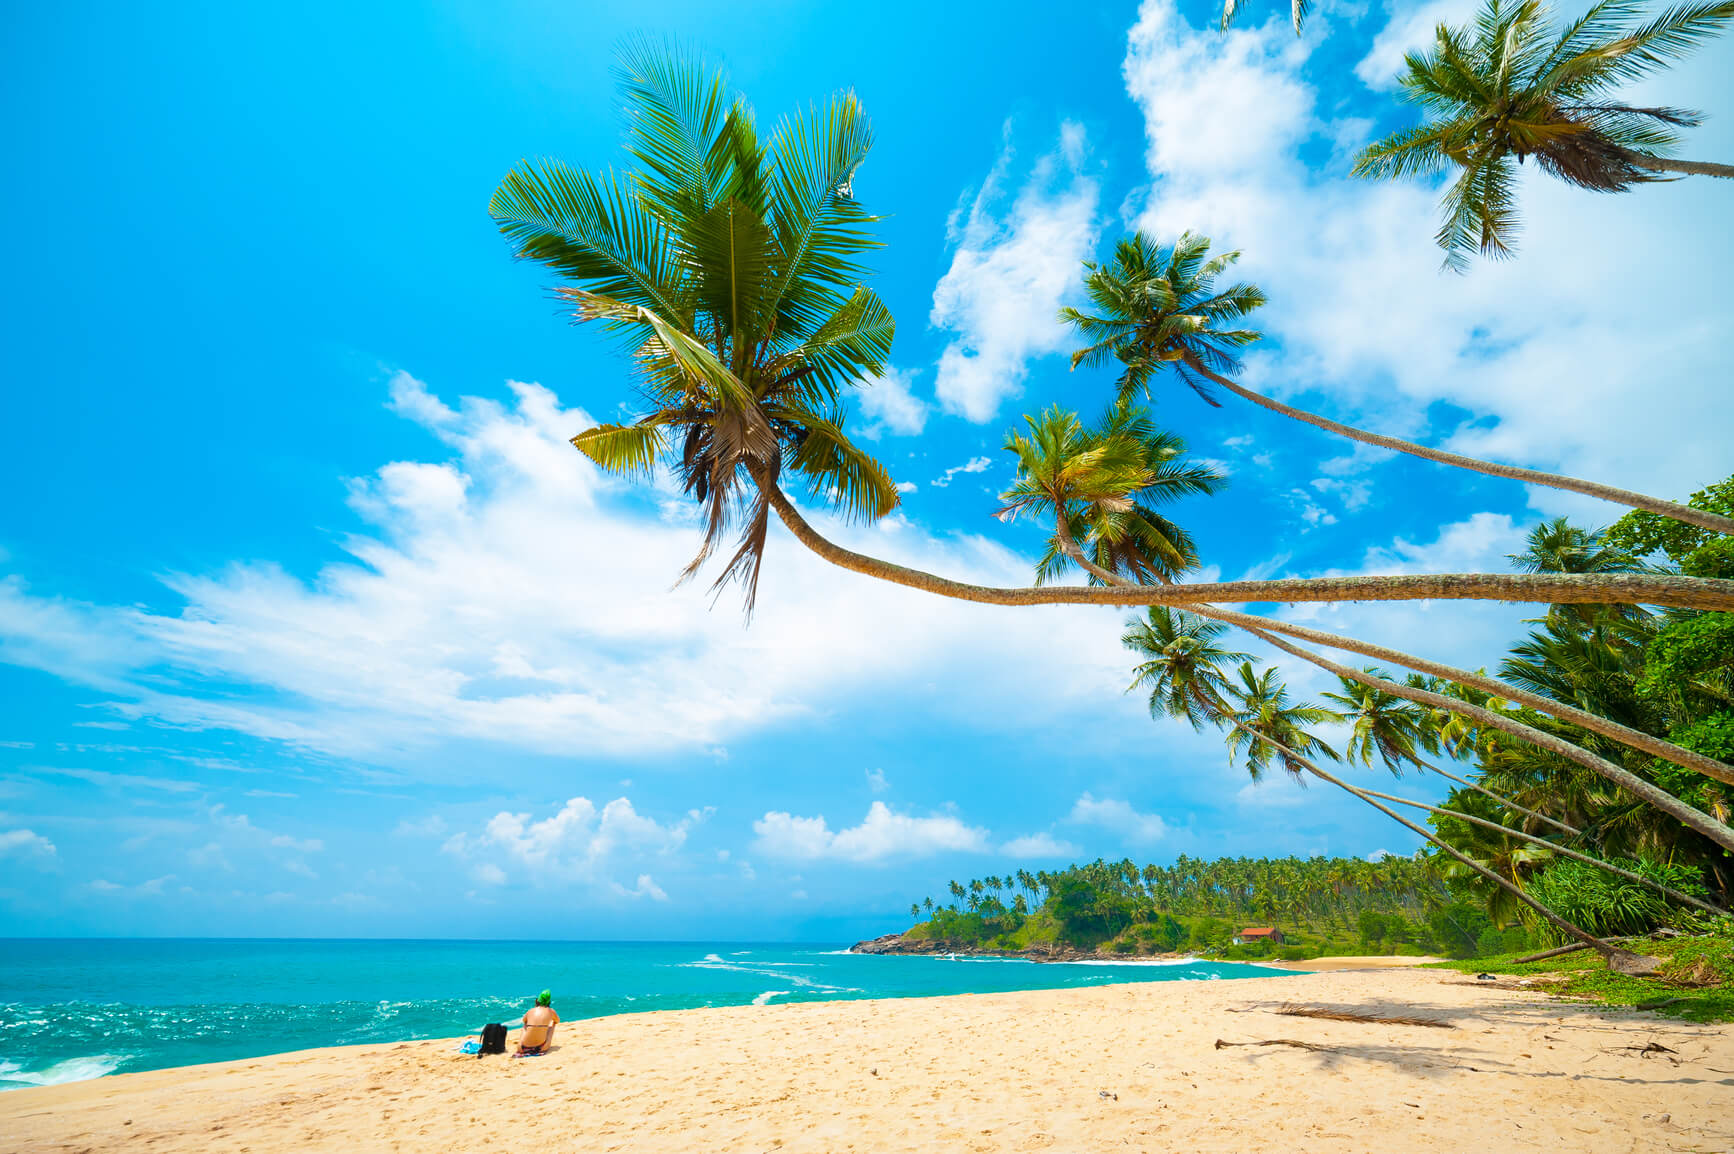 <div class='expired'>EXPIRED</div>PACKAGE HOLIDAY: Half Board from Amsterdam to Sri Lanka for 7 nights at a 3* hotel for only €560 per person | Secret Flying